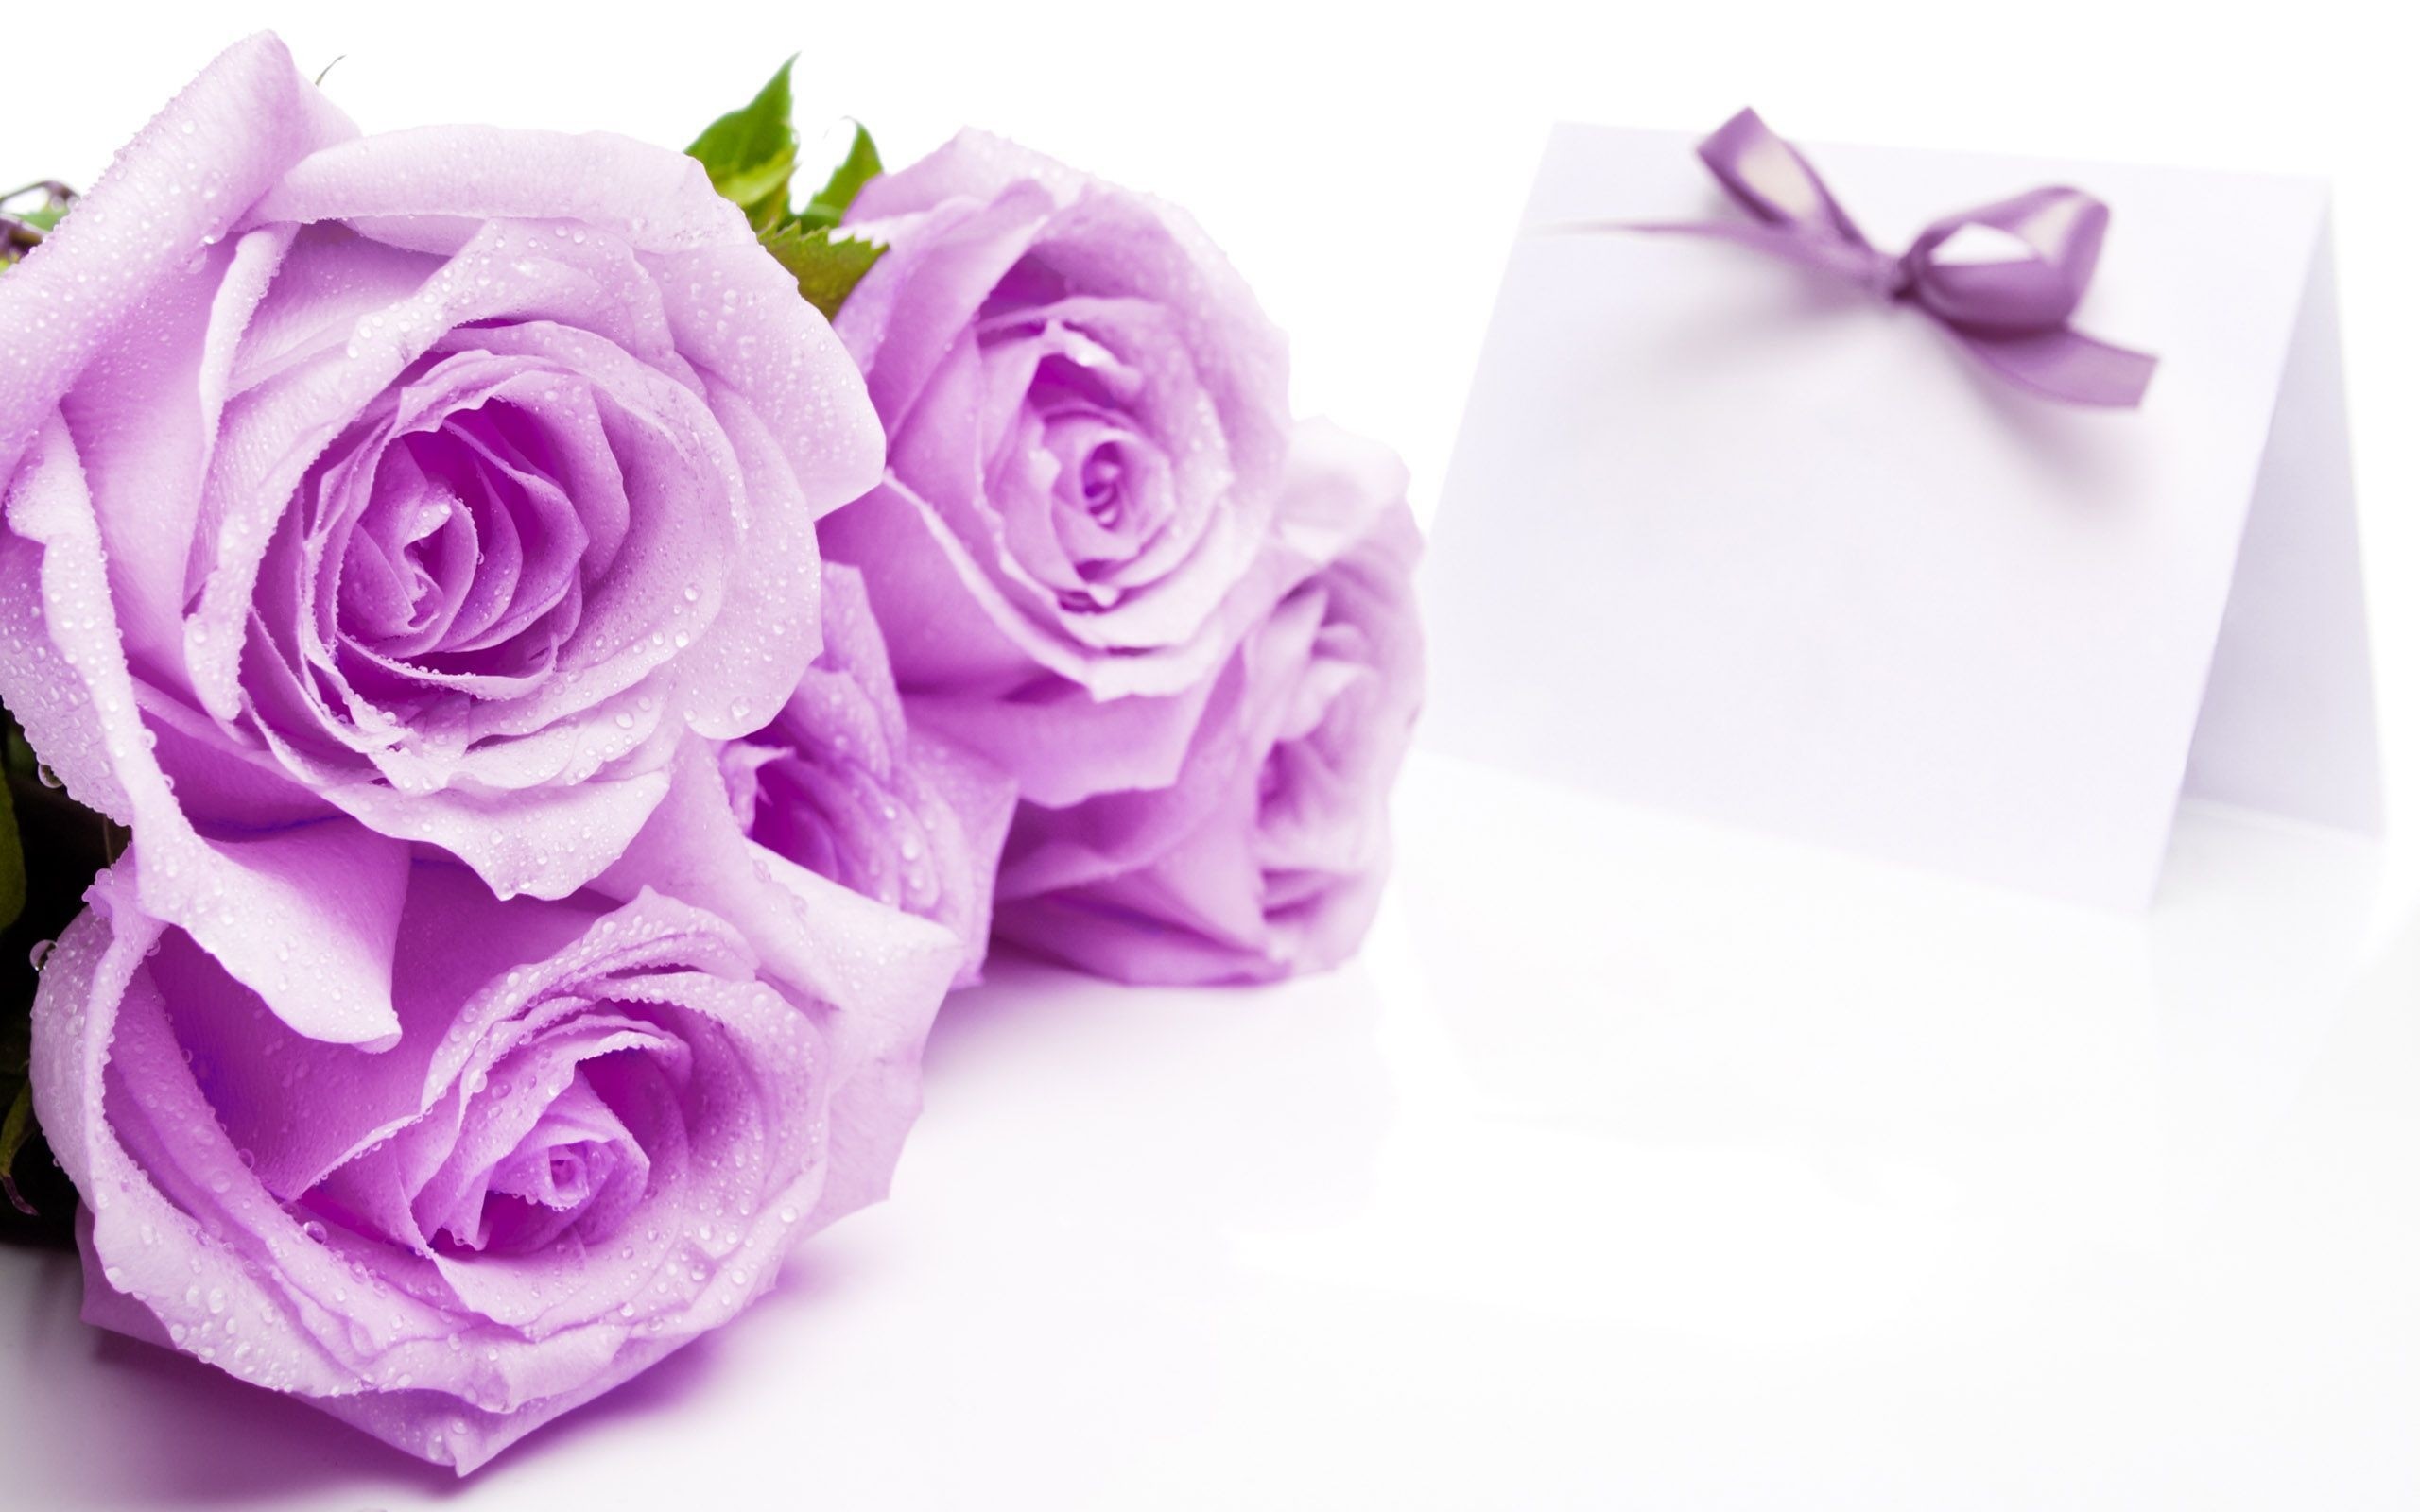 New Wallpaper of love with flowers – Wallpaper of love with flowers  Download New Wallpaper of